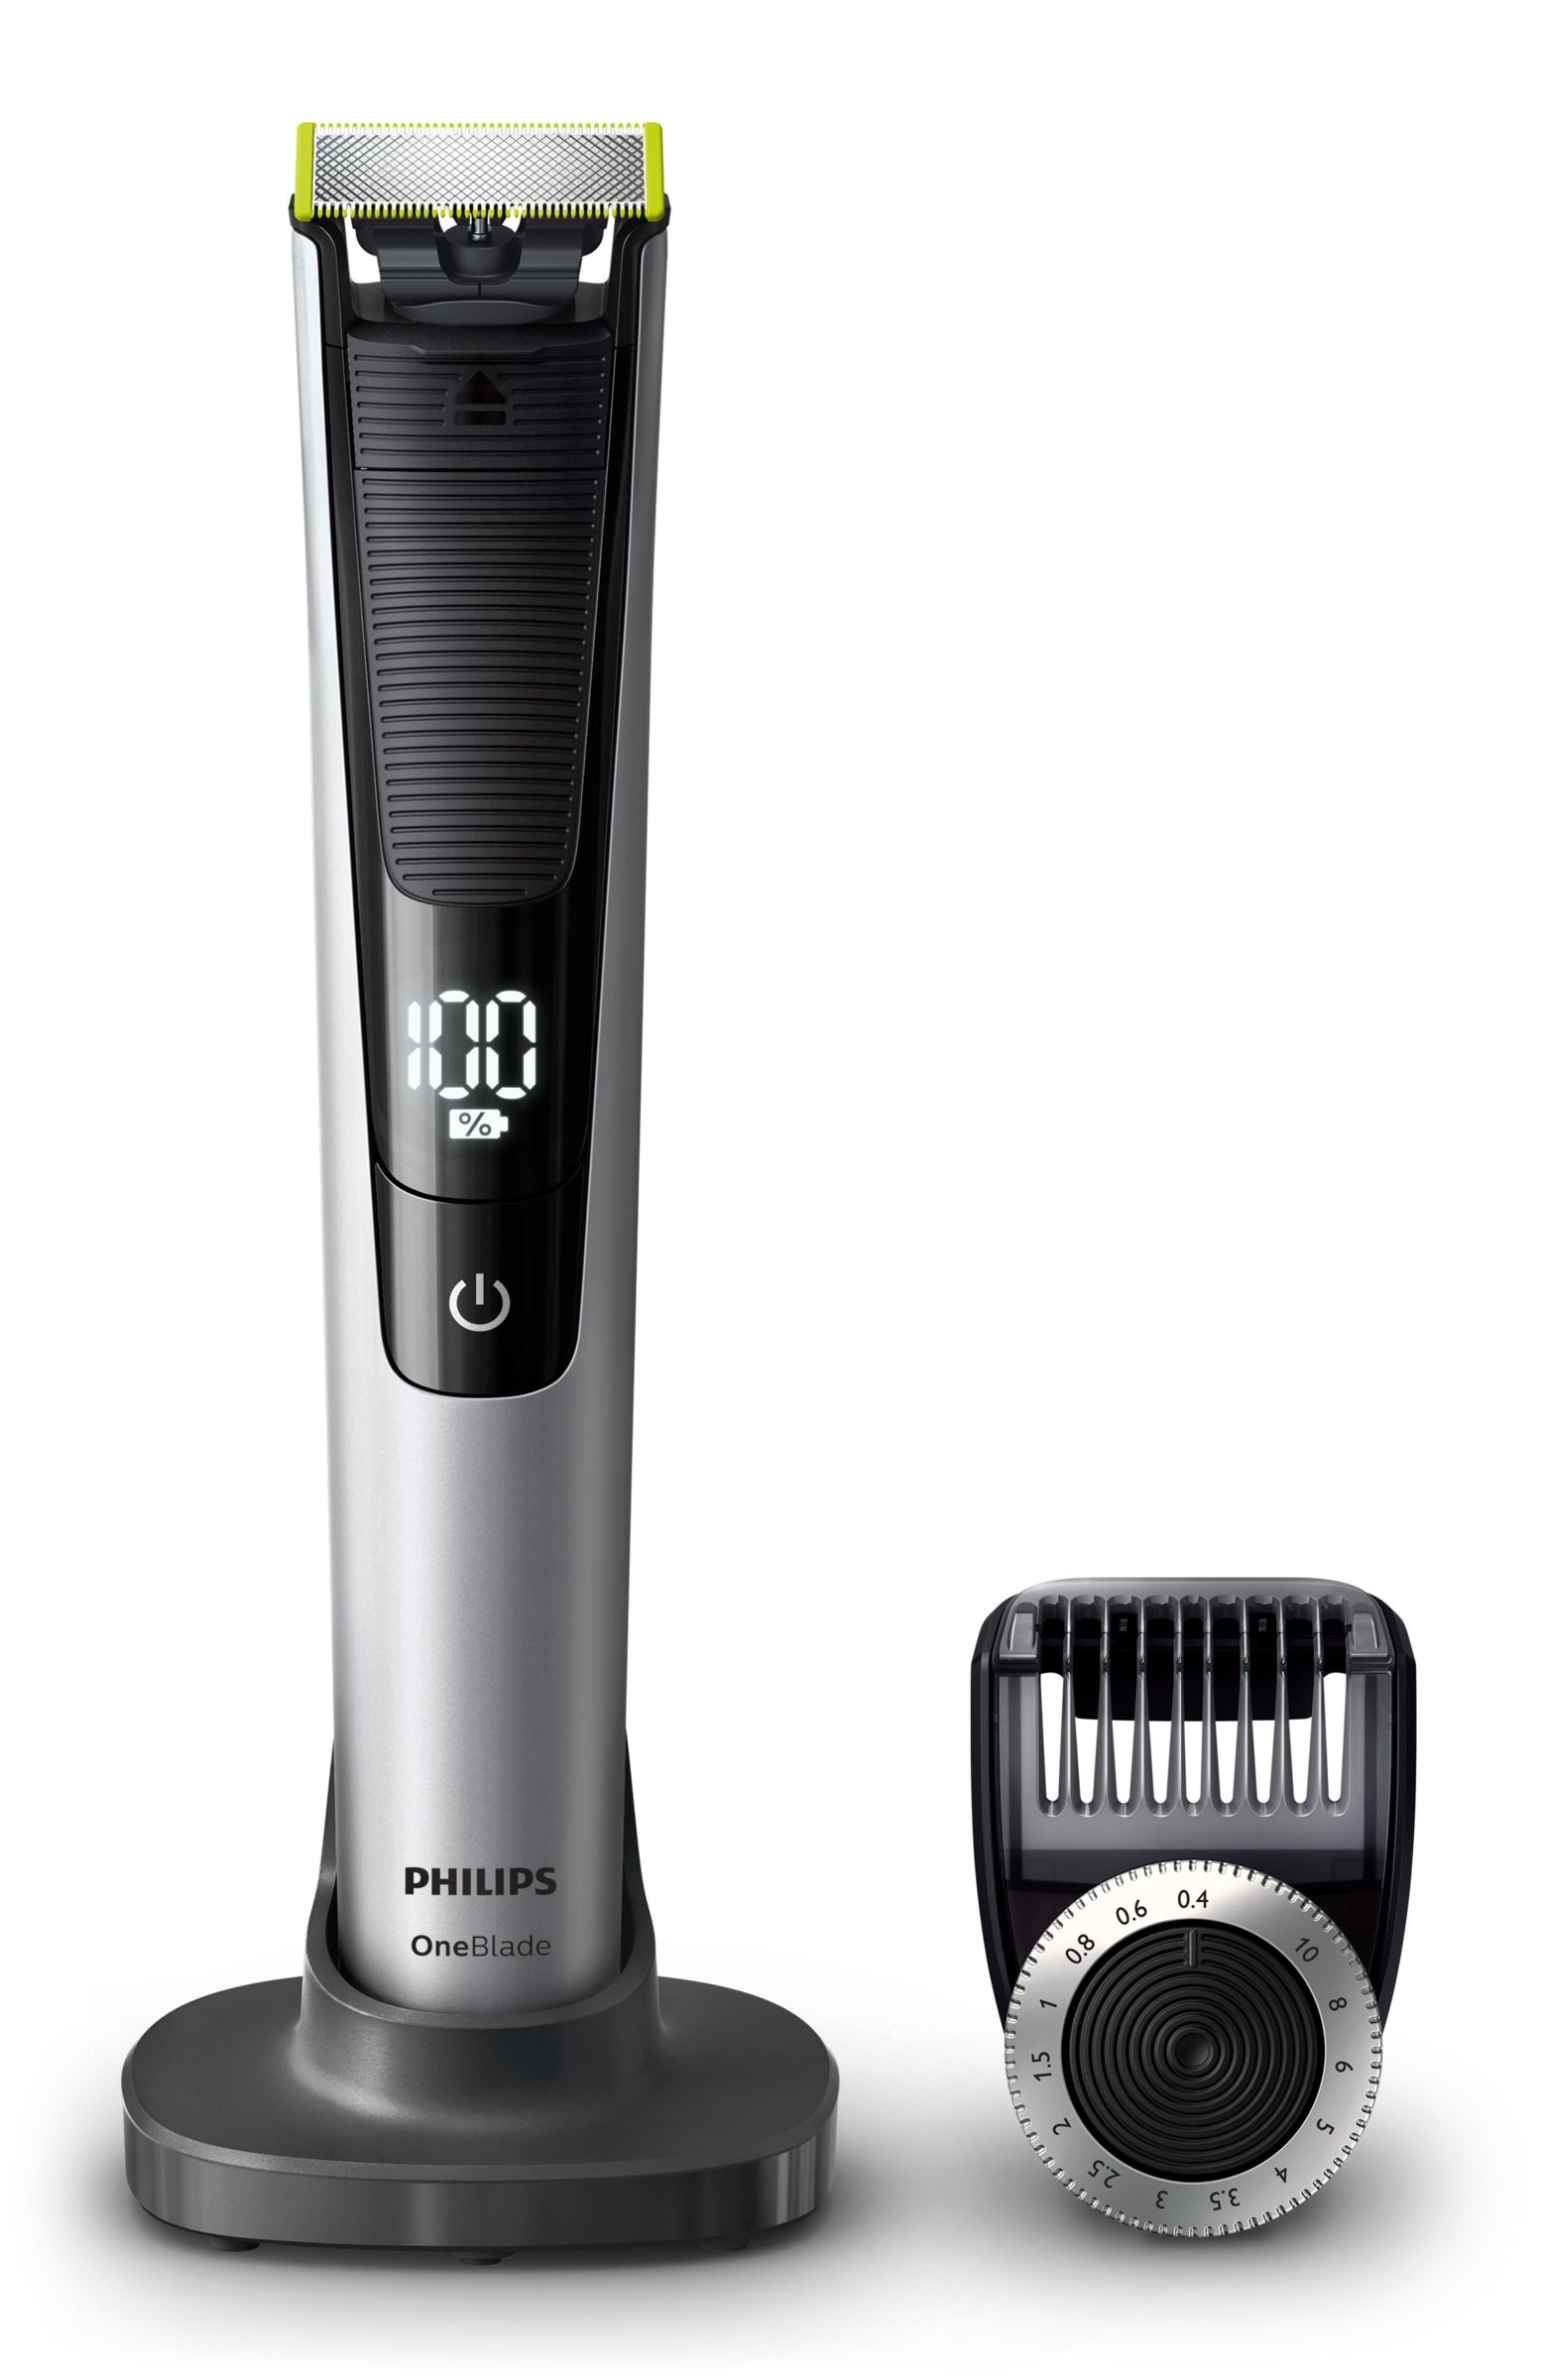 Image of Philips One Blade Pro QP6520/20